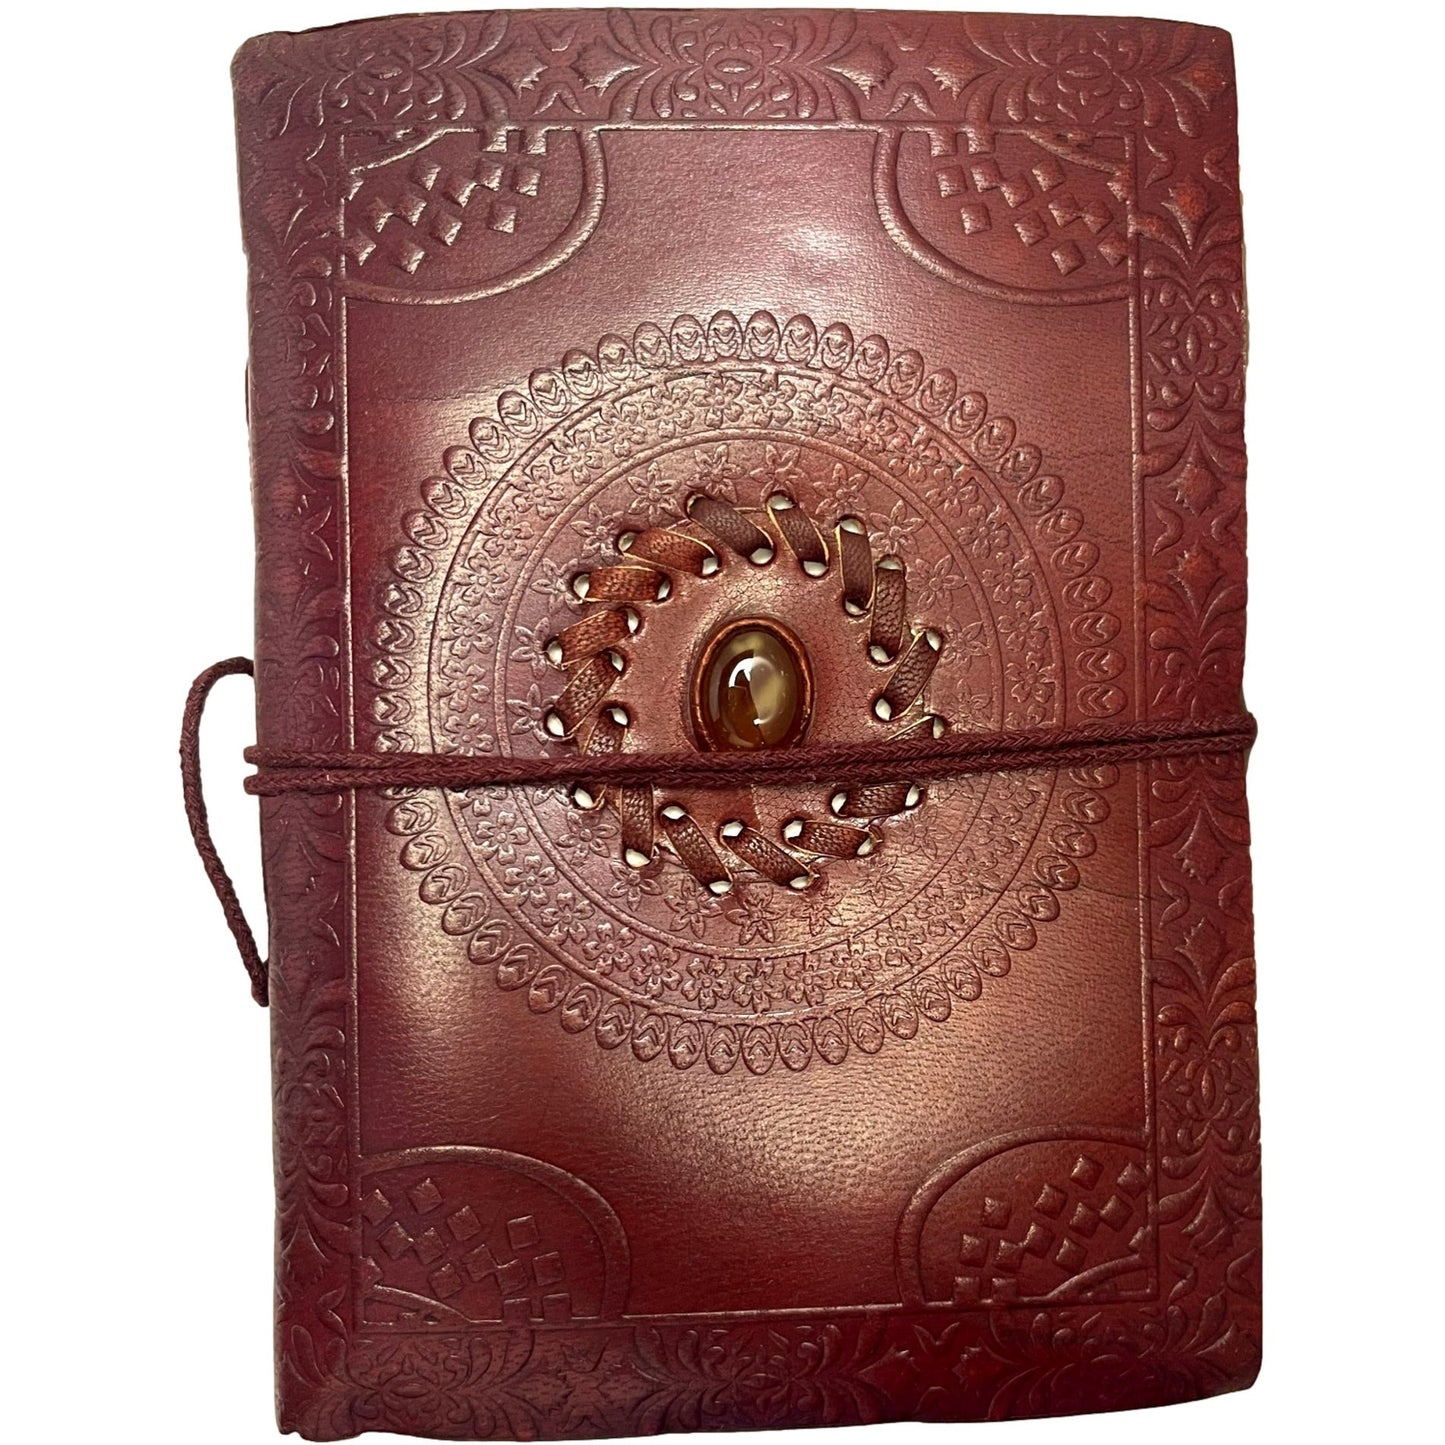 100% Leather Journal with Embossed Gemstone, Malachite, Carnelian, Onyx, or Turquoise